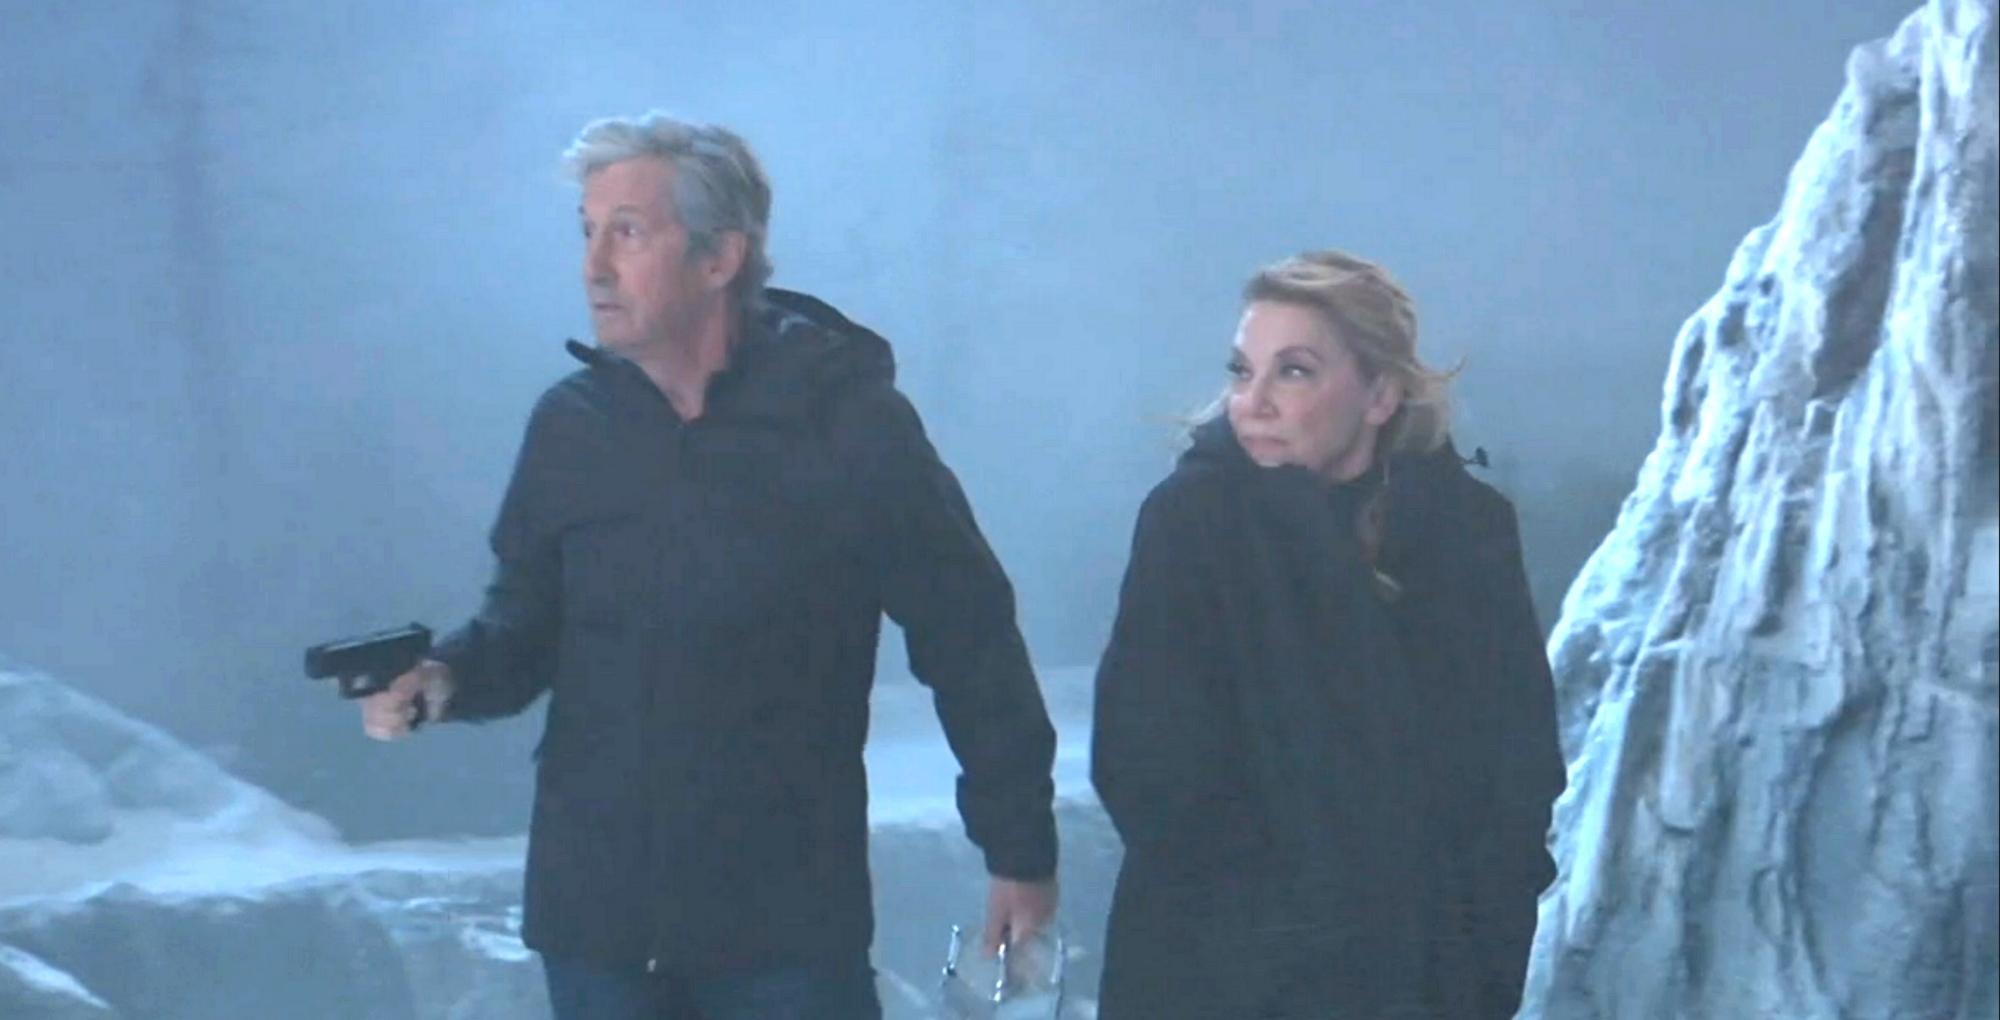 general hospital spoilers for may 5, 2023 have victor and liesl in the snow with his plans going all wrong.